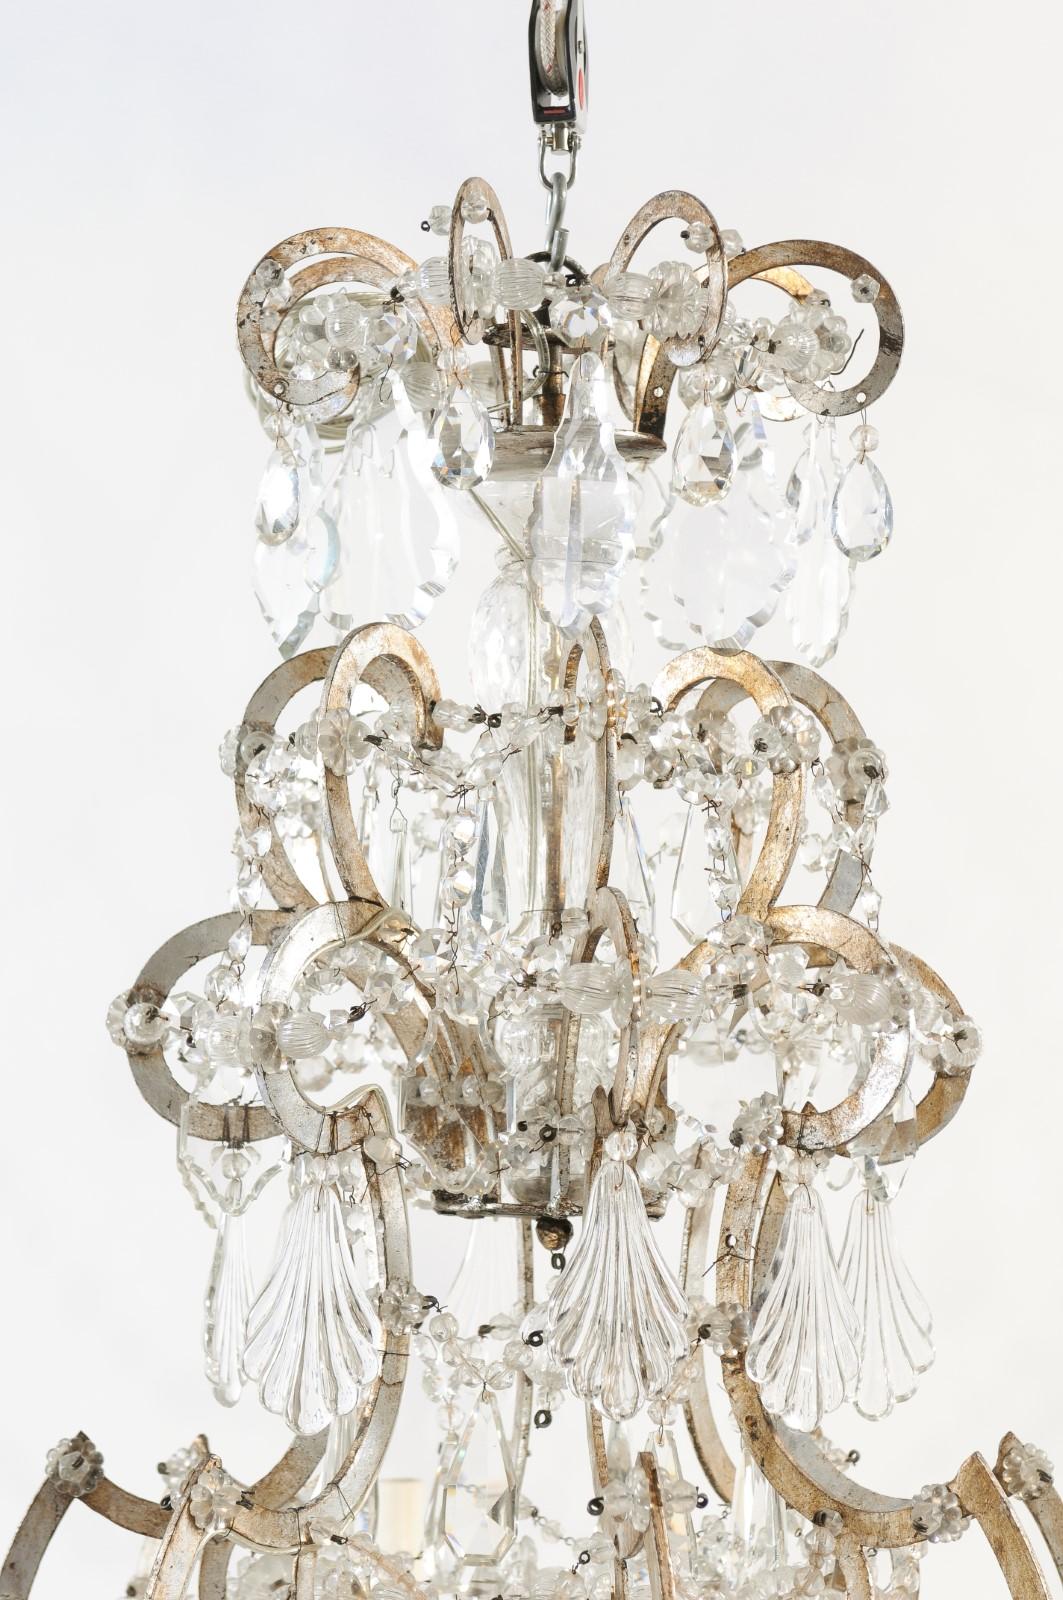 Italian Crystal & Silvered Wood Chandelier with 8 Lights, 19th Century For Sale 3